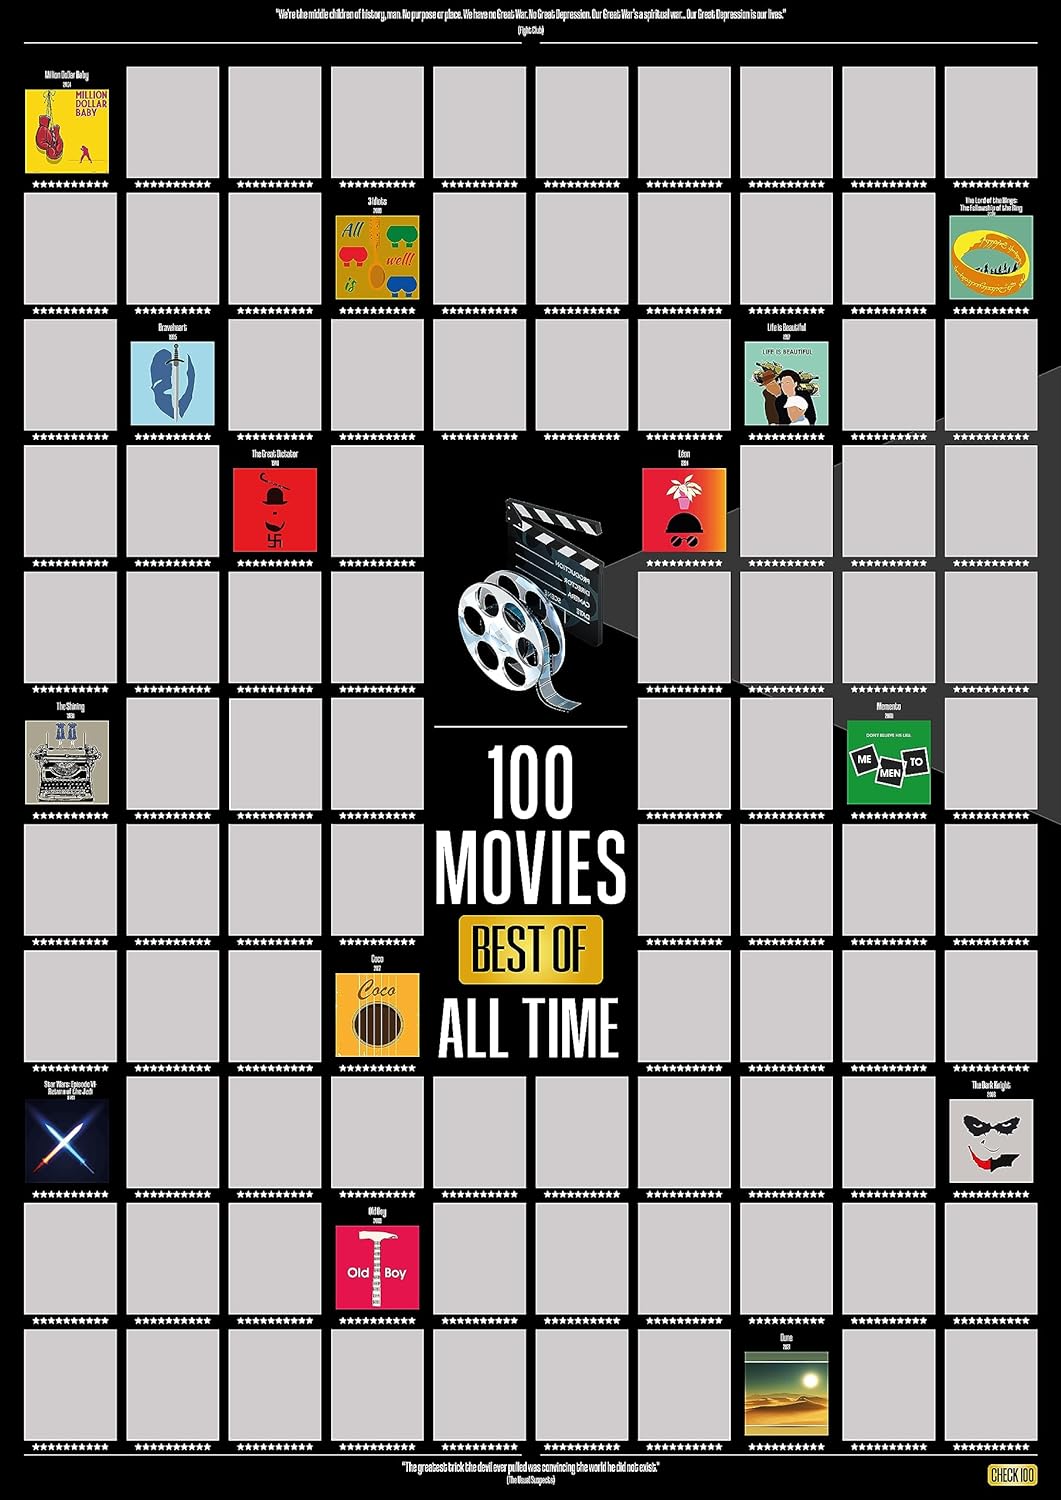 Top 100 Movies Bucket List, 100 Movies Scratch off Poster, 100 Movies Best of All Time, Stunning Quality and Bonus Items, Best Gift for Friends,Birthday,Christmas,Valentine's Day,Easter 16.5''x23.4''